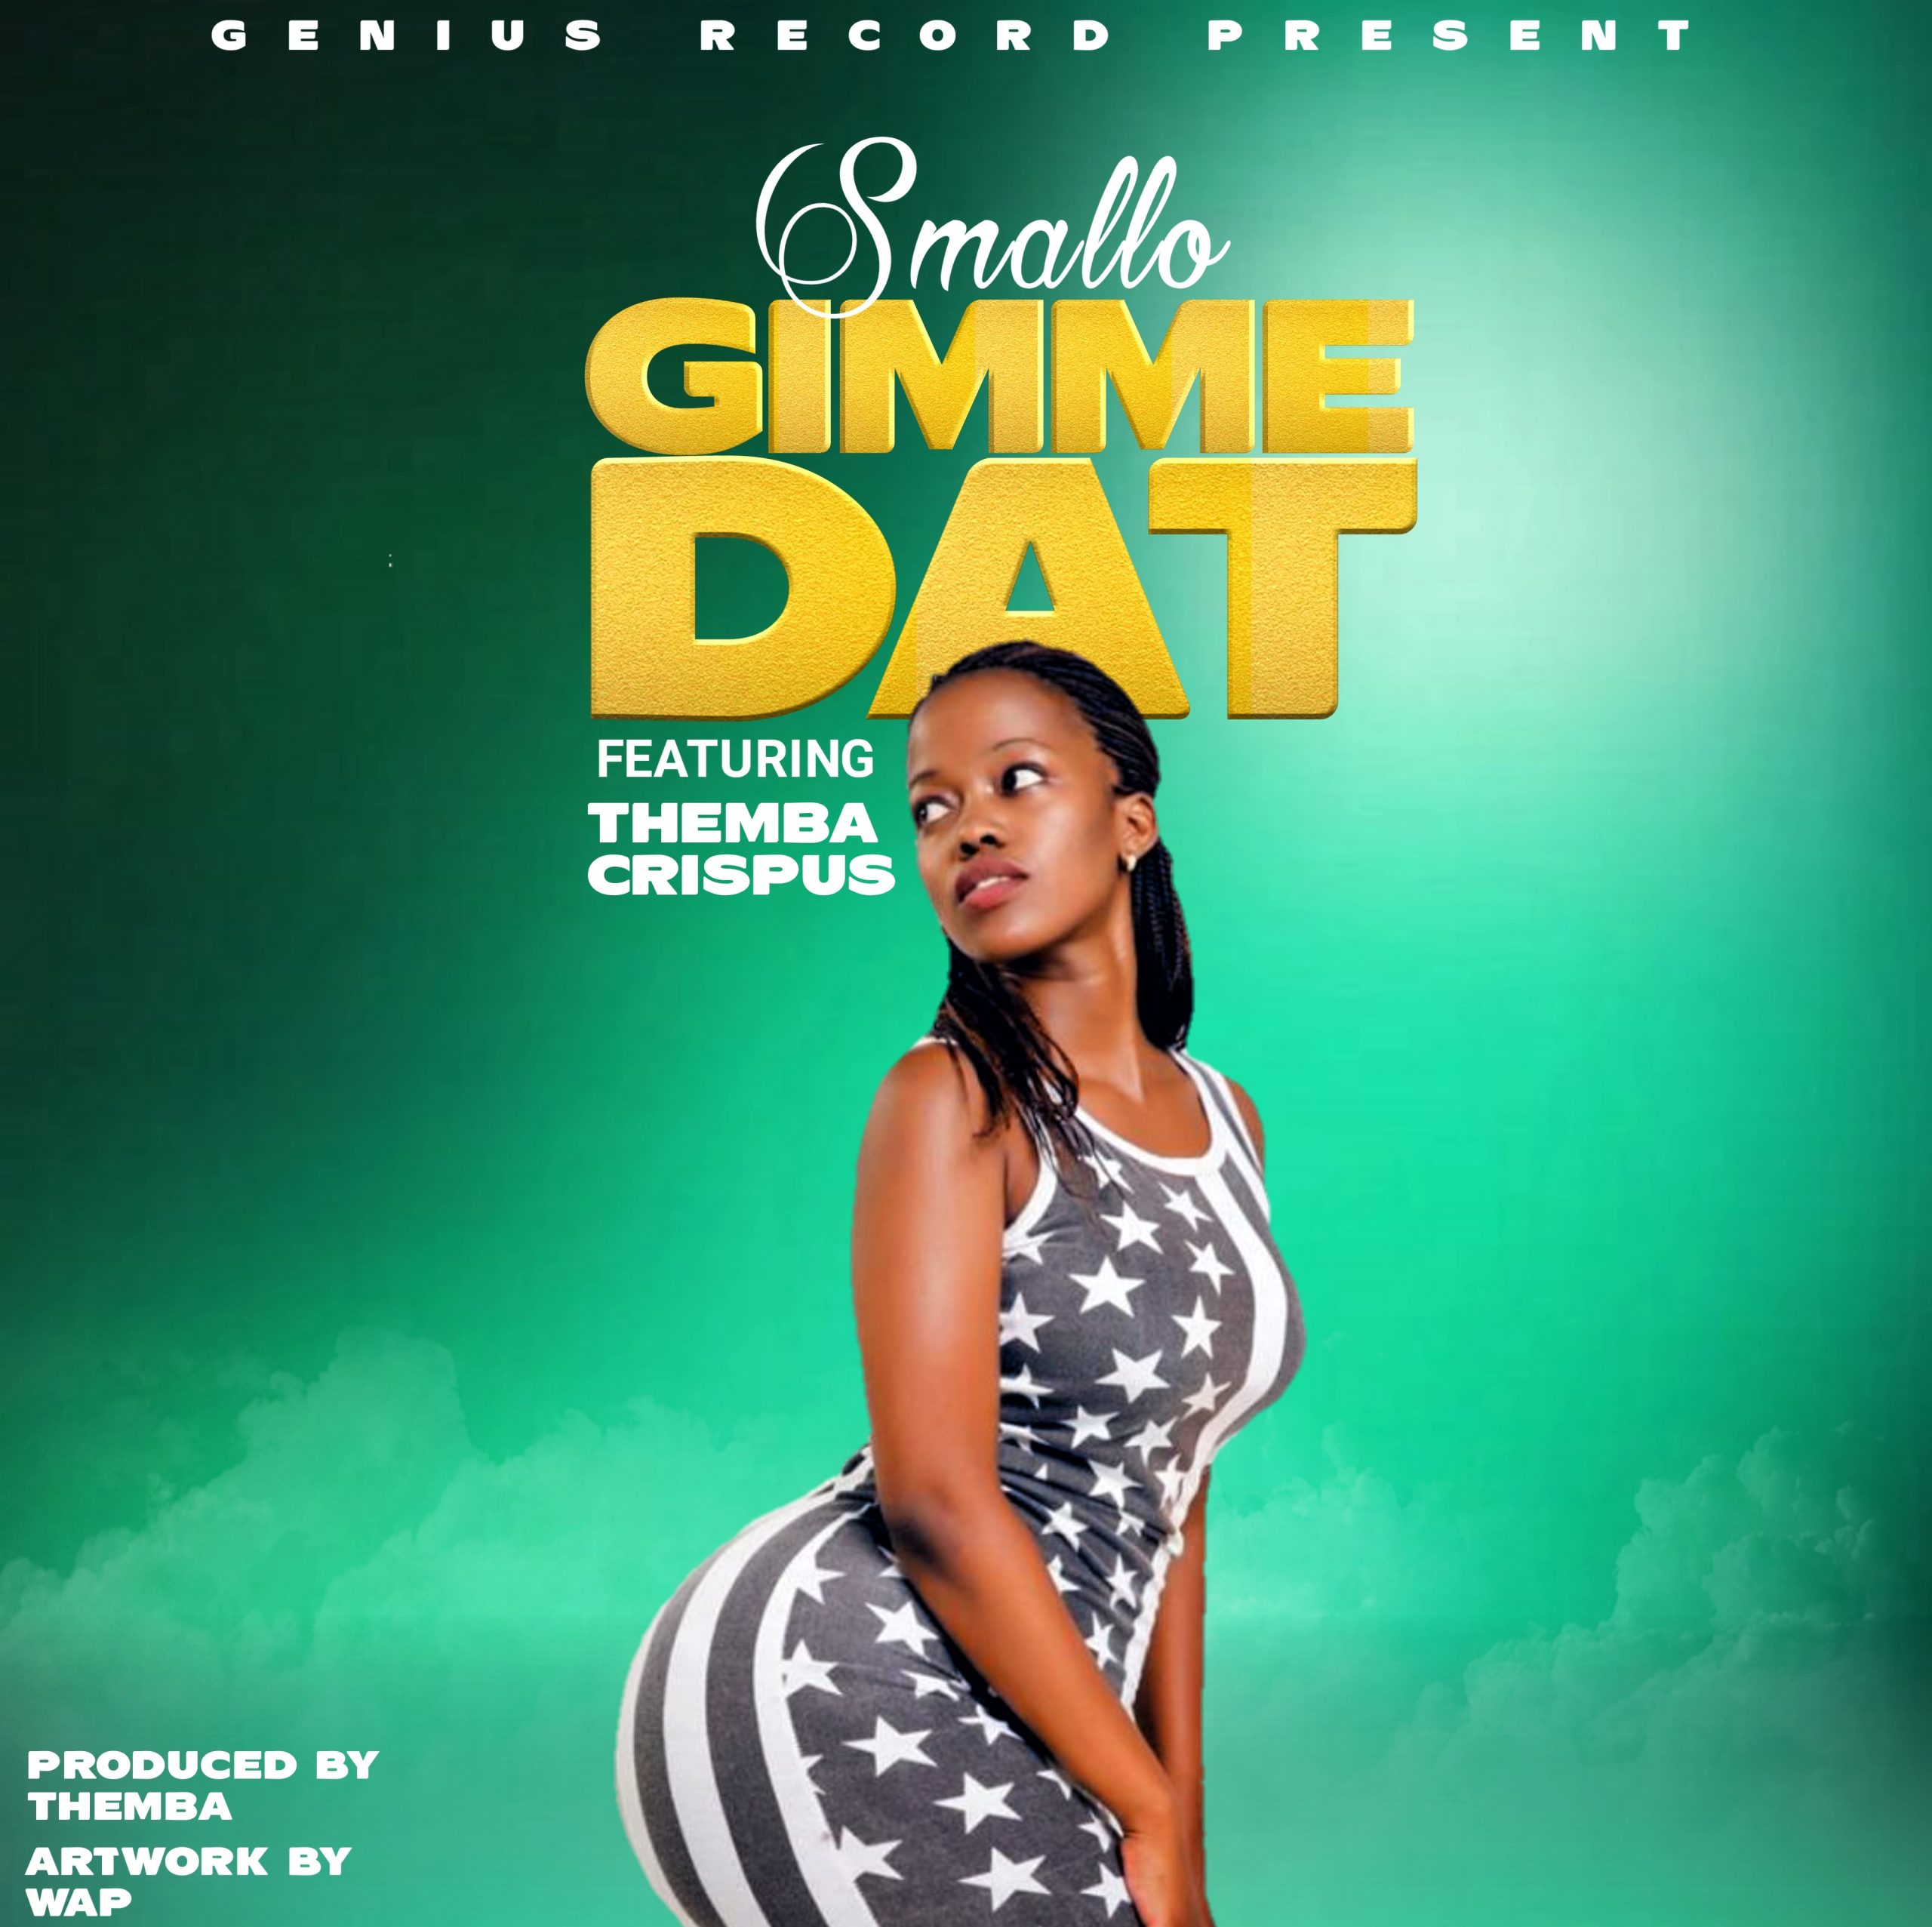 Smallo-ft-Themba-crispus_Gimme-dat-prod-by-Themba-Jam-dee